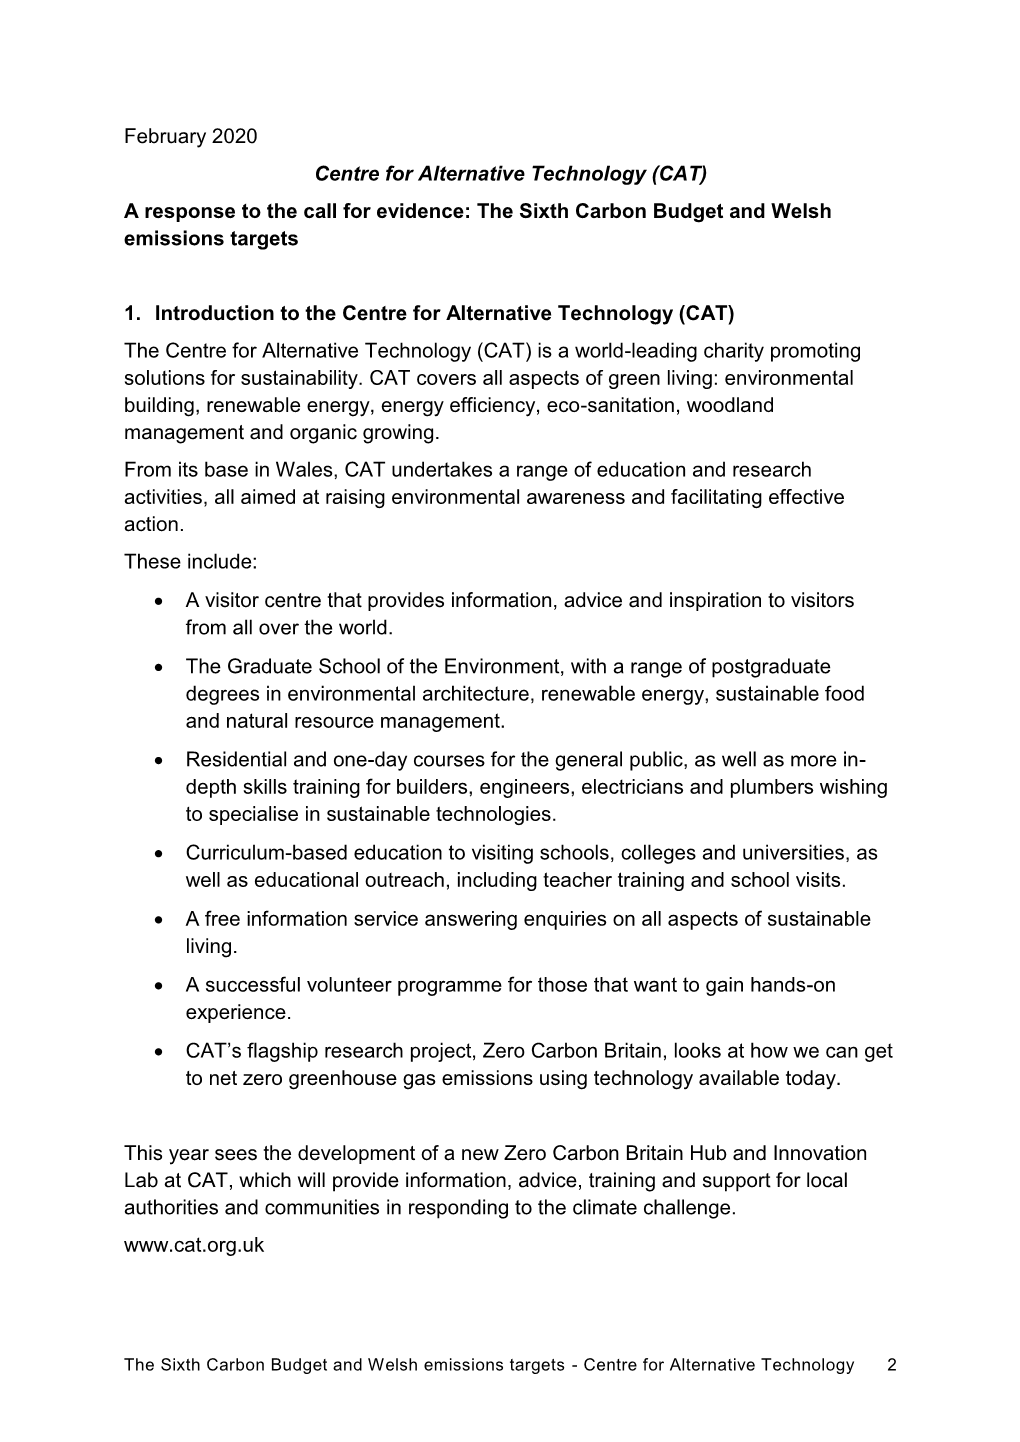 February 2020 Centre for Alternative Technology (CAT) a Response to the Call for Evidence: the Sixth Carbon Budget and Welsh Emissions Targets